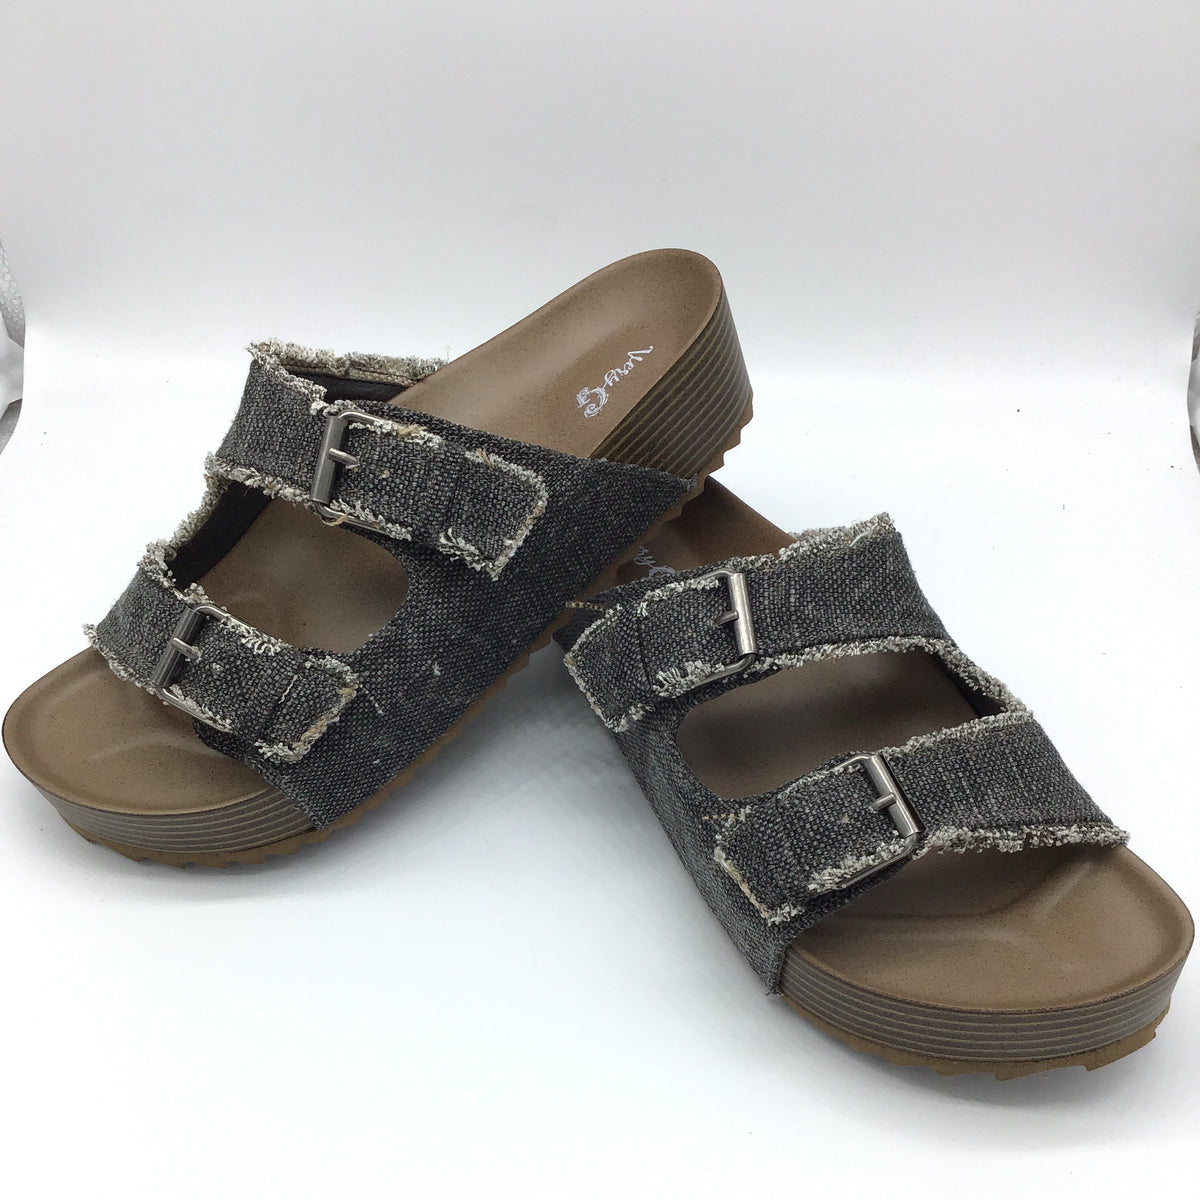 "Robyn" Sandal By Very G (Charcoal)